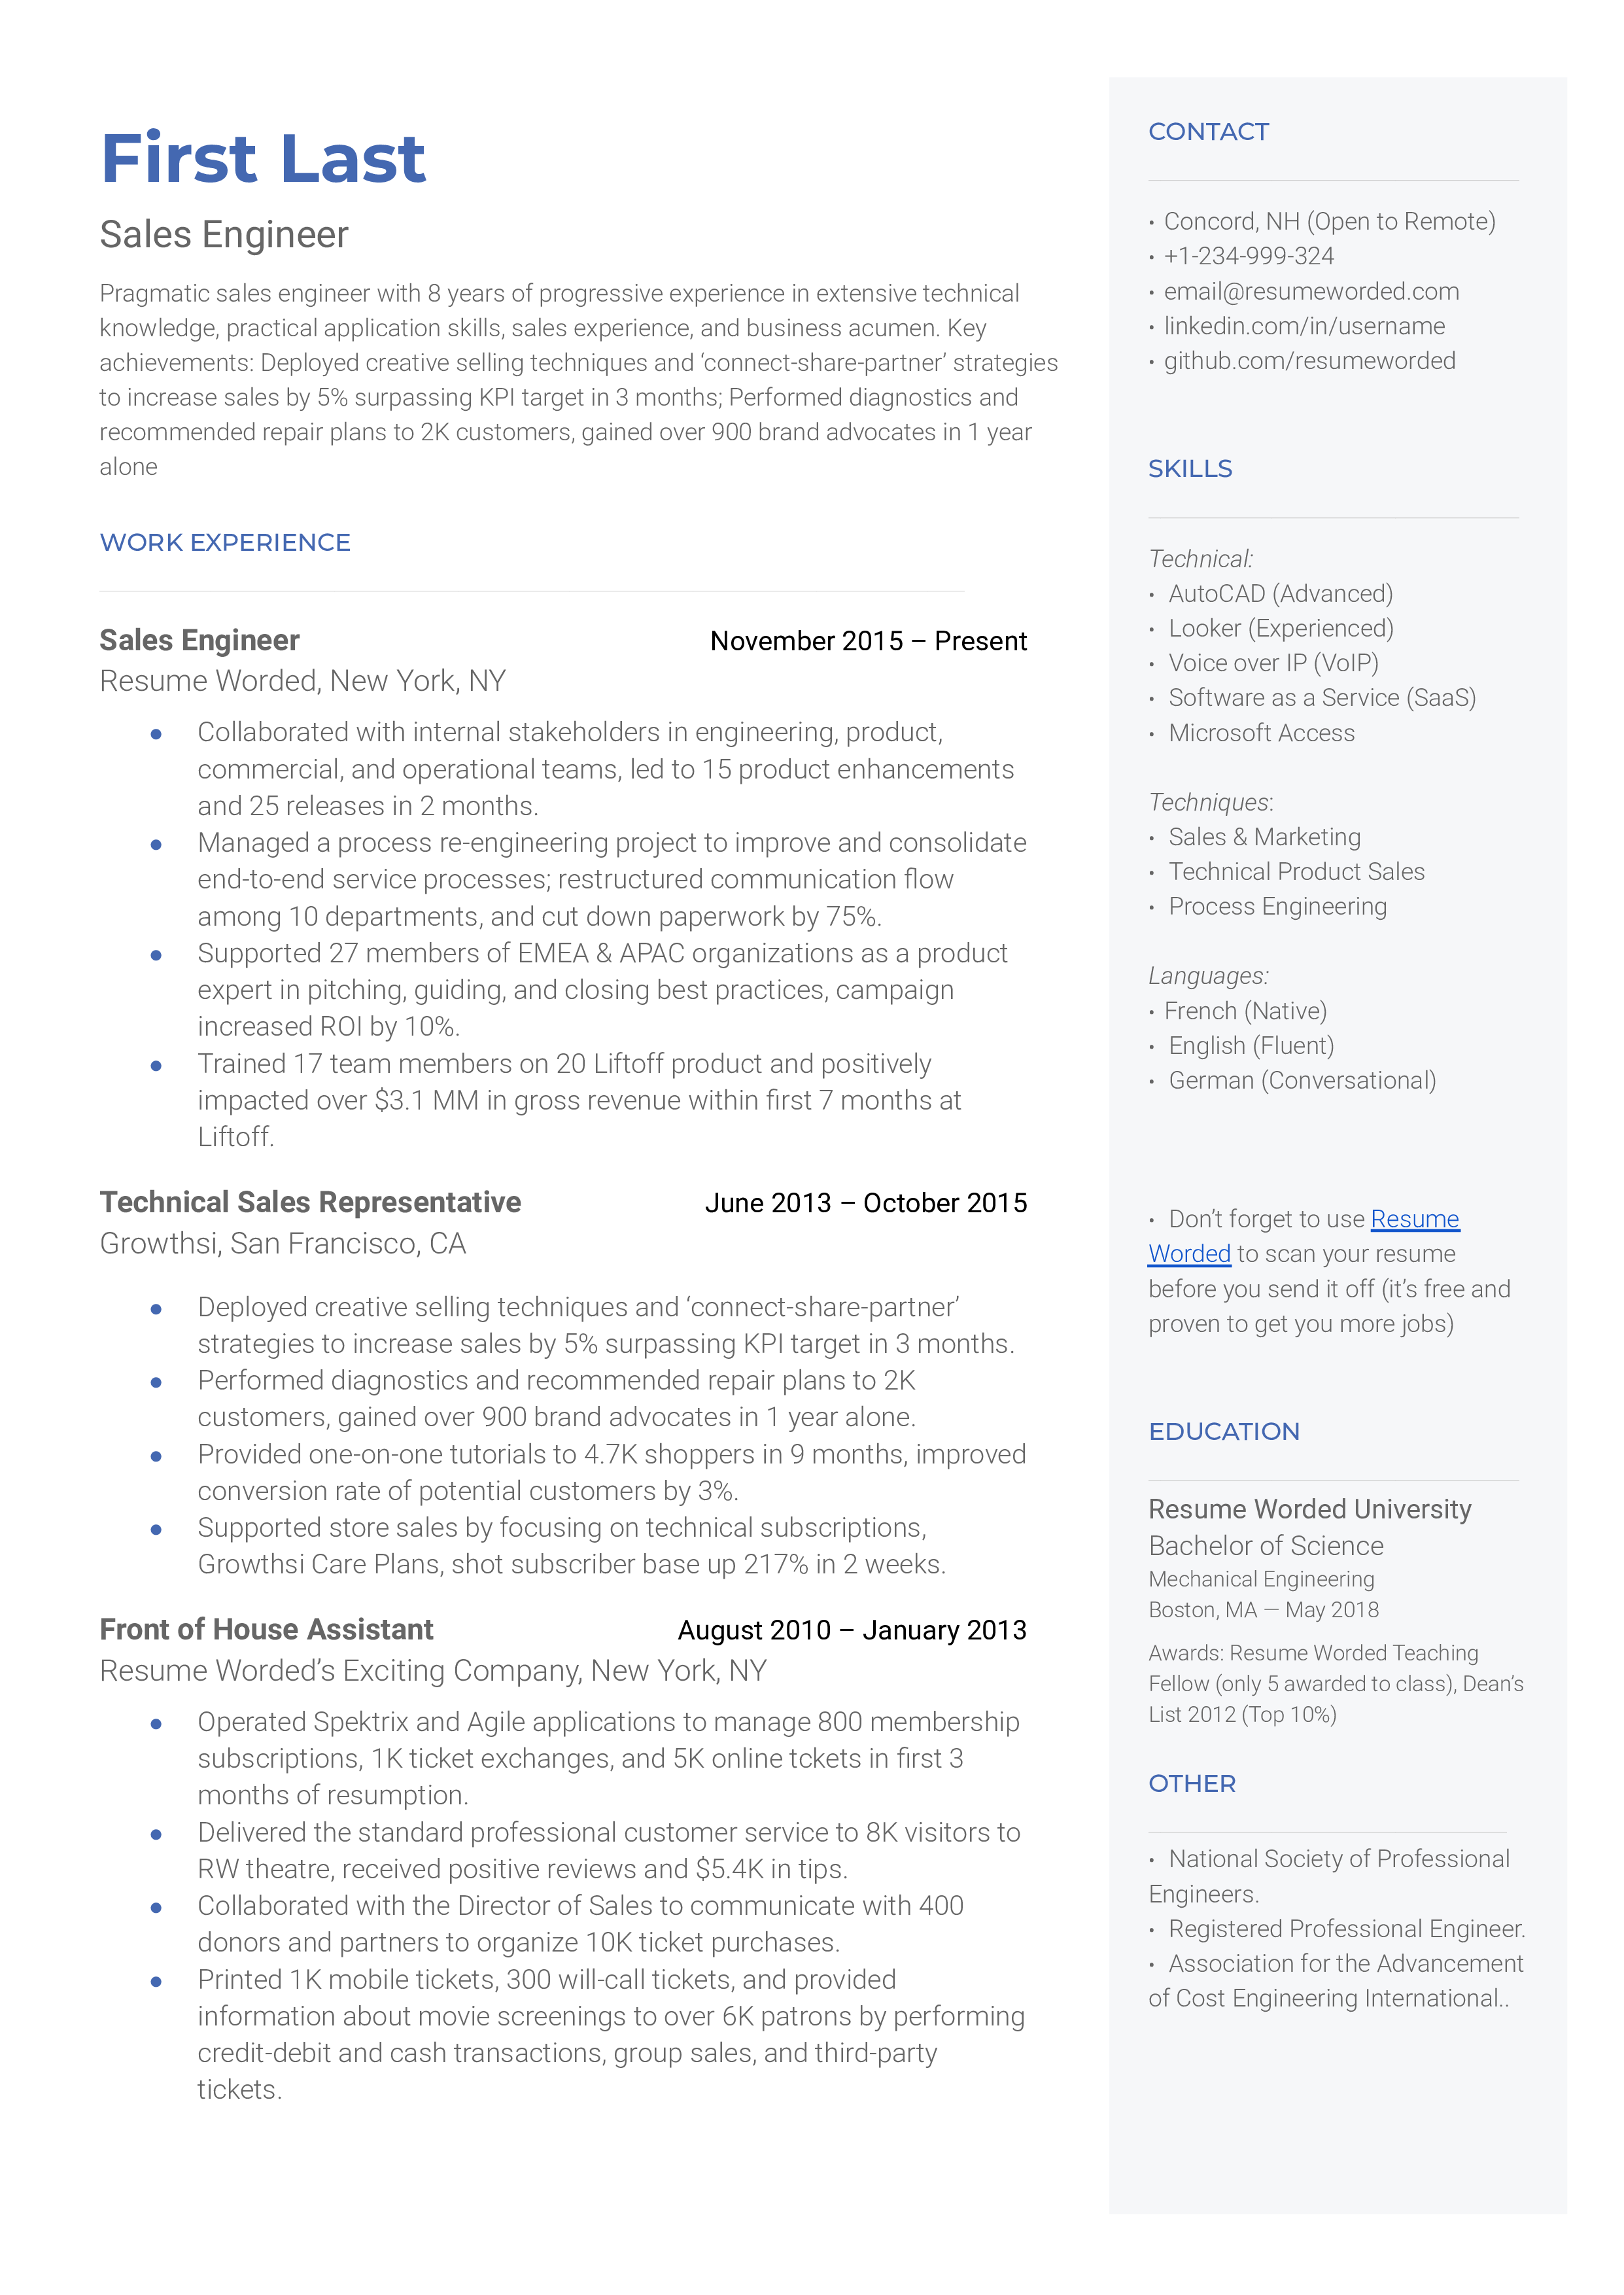 A resume for a sales engineer that highlights their experience in selling a company's technological products.